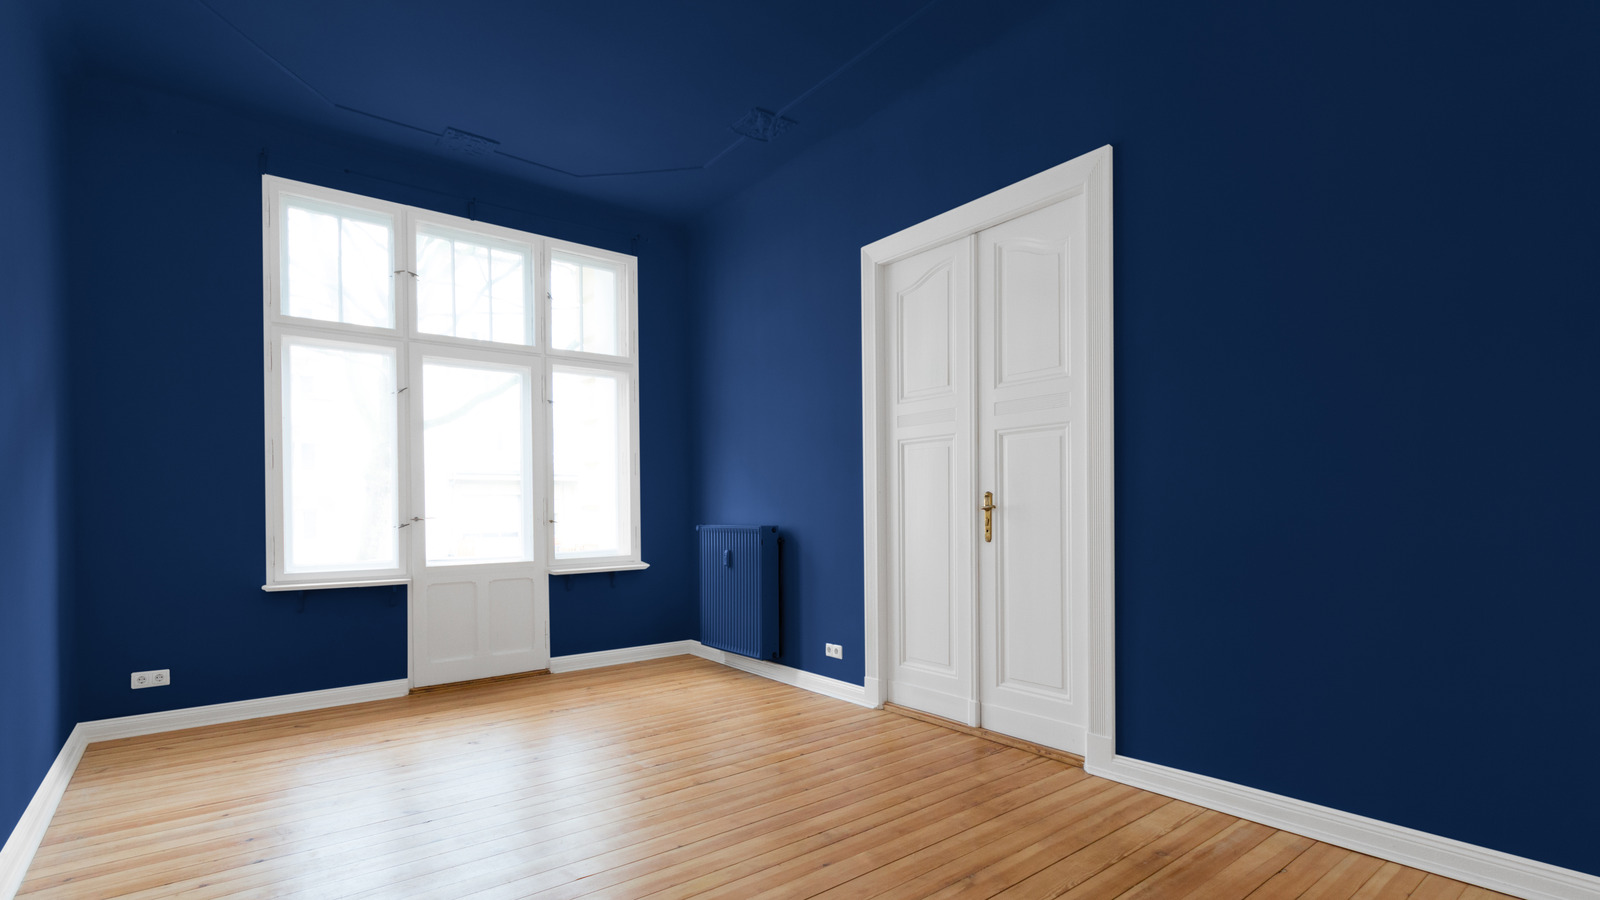 Should The Entire House Be Painted The Same Color?